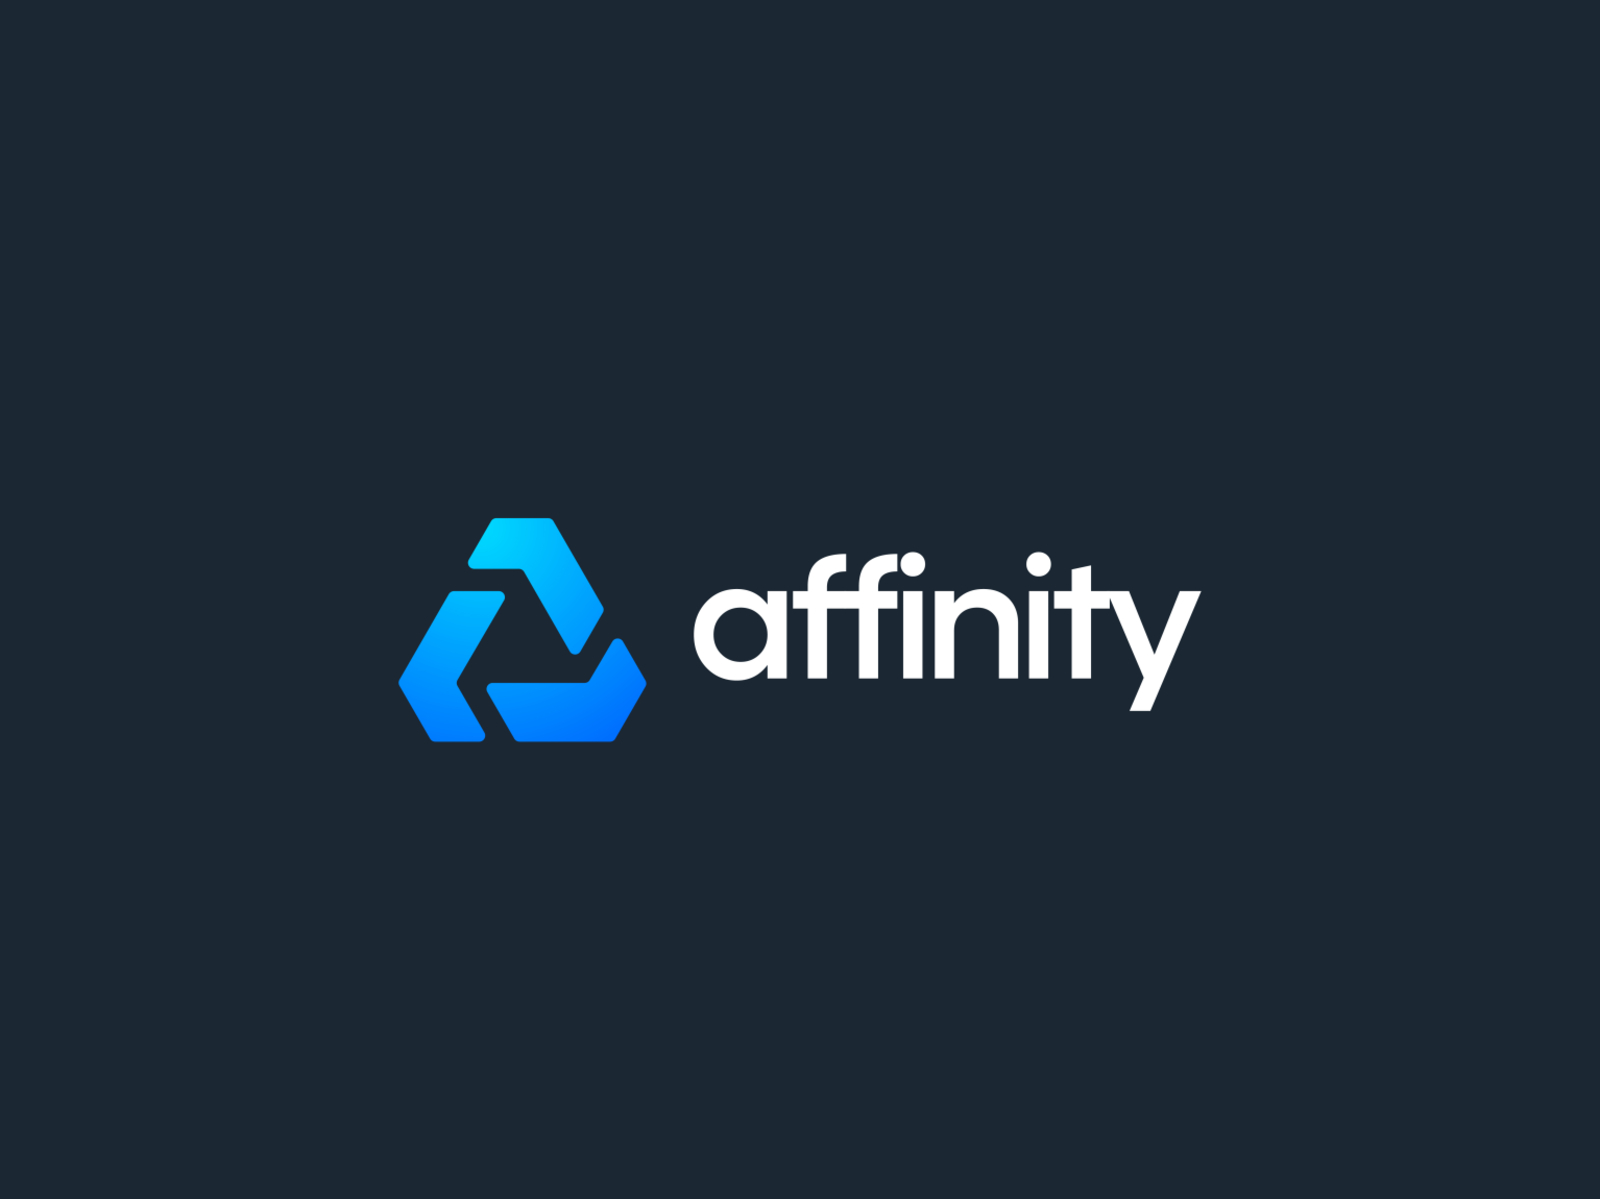 Affinity logo concept by Yassine Brands® on Dribbble